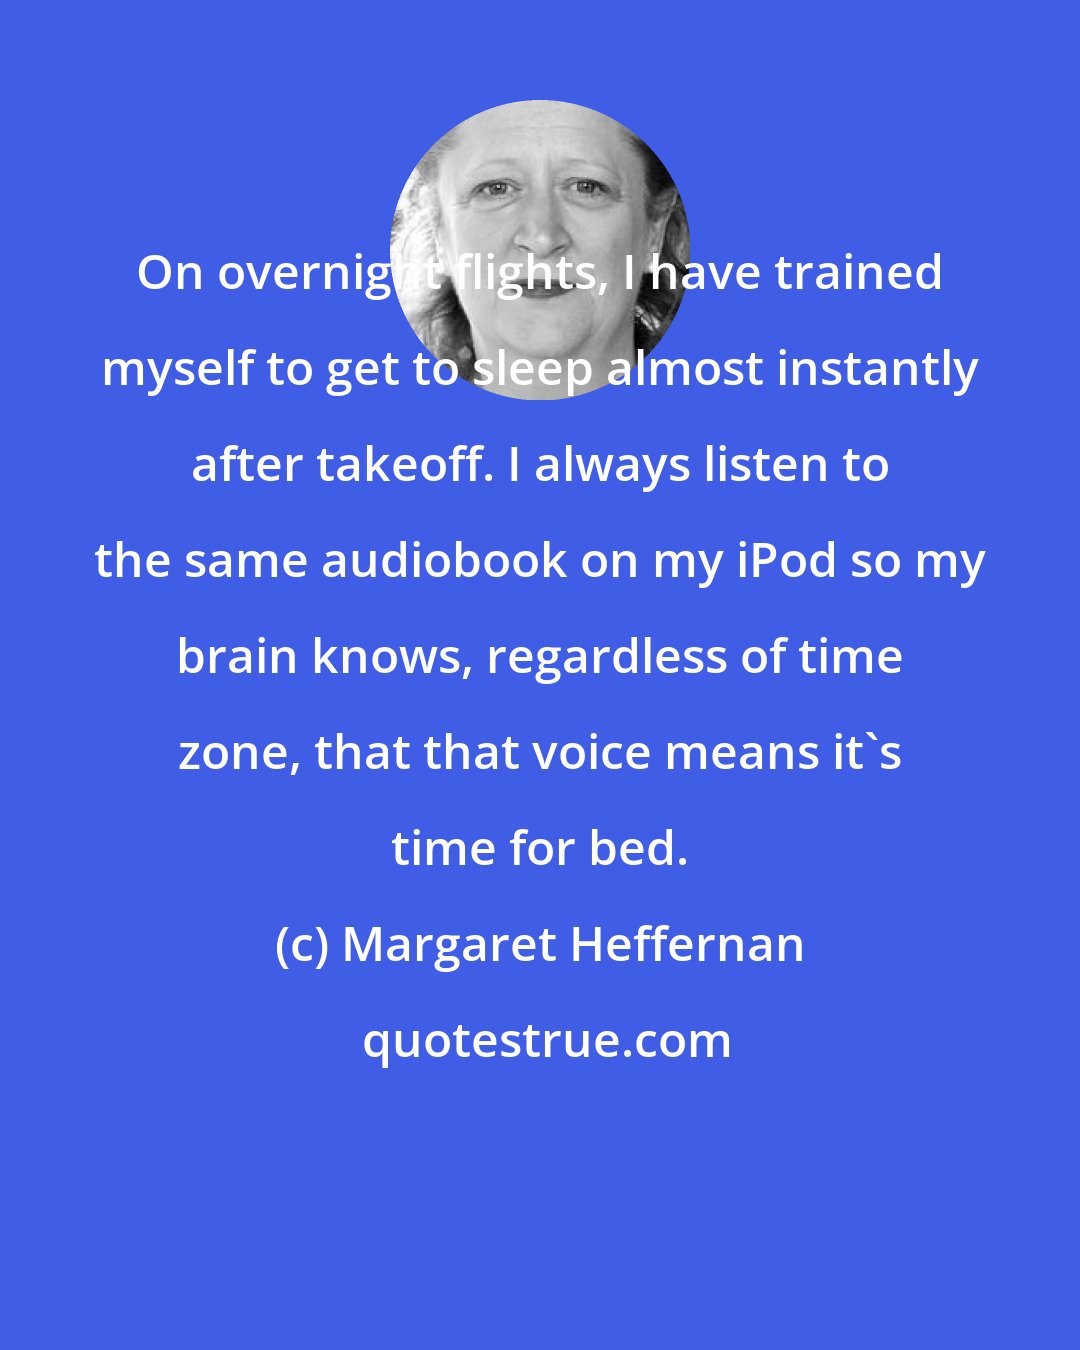 Margaret Heffernan: On overnight flights, I have trained myself to get to sleep almost instantly after takeoff. I always listen to the same audiobook on my iPod so my brain knows, regardless of time zone, that that voice means it's time for bed.